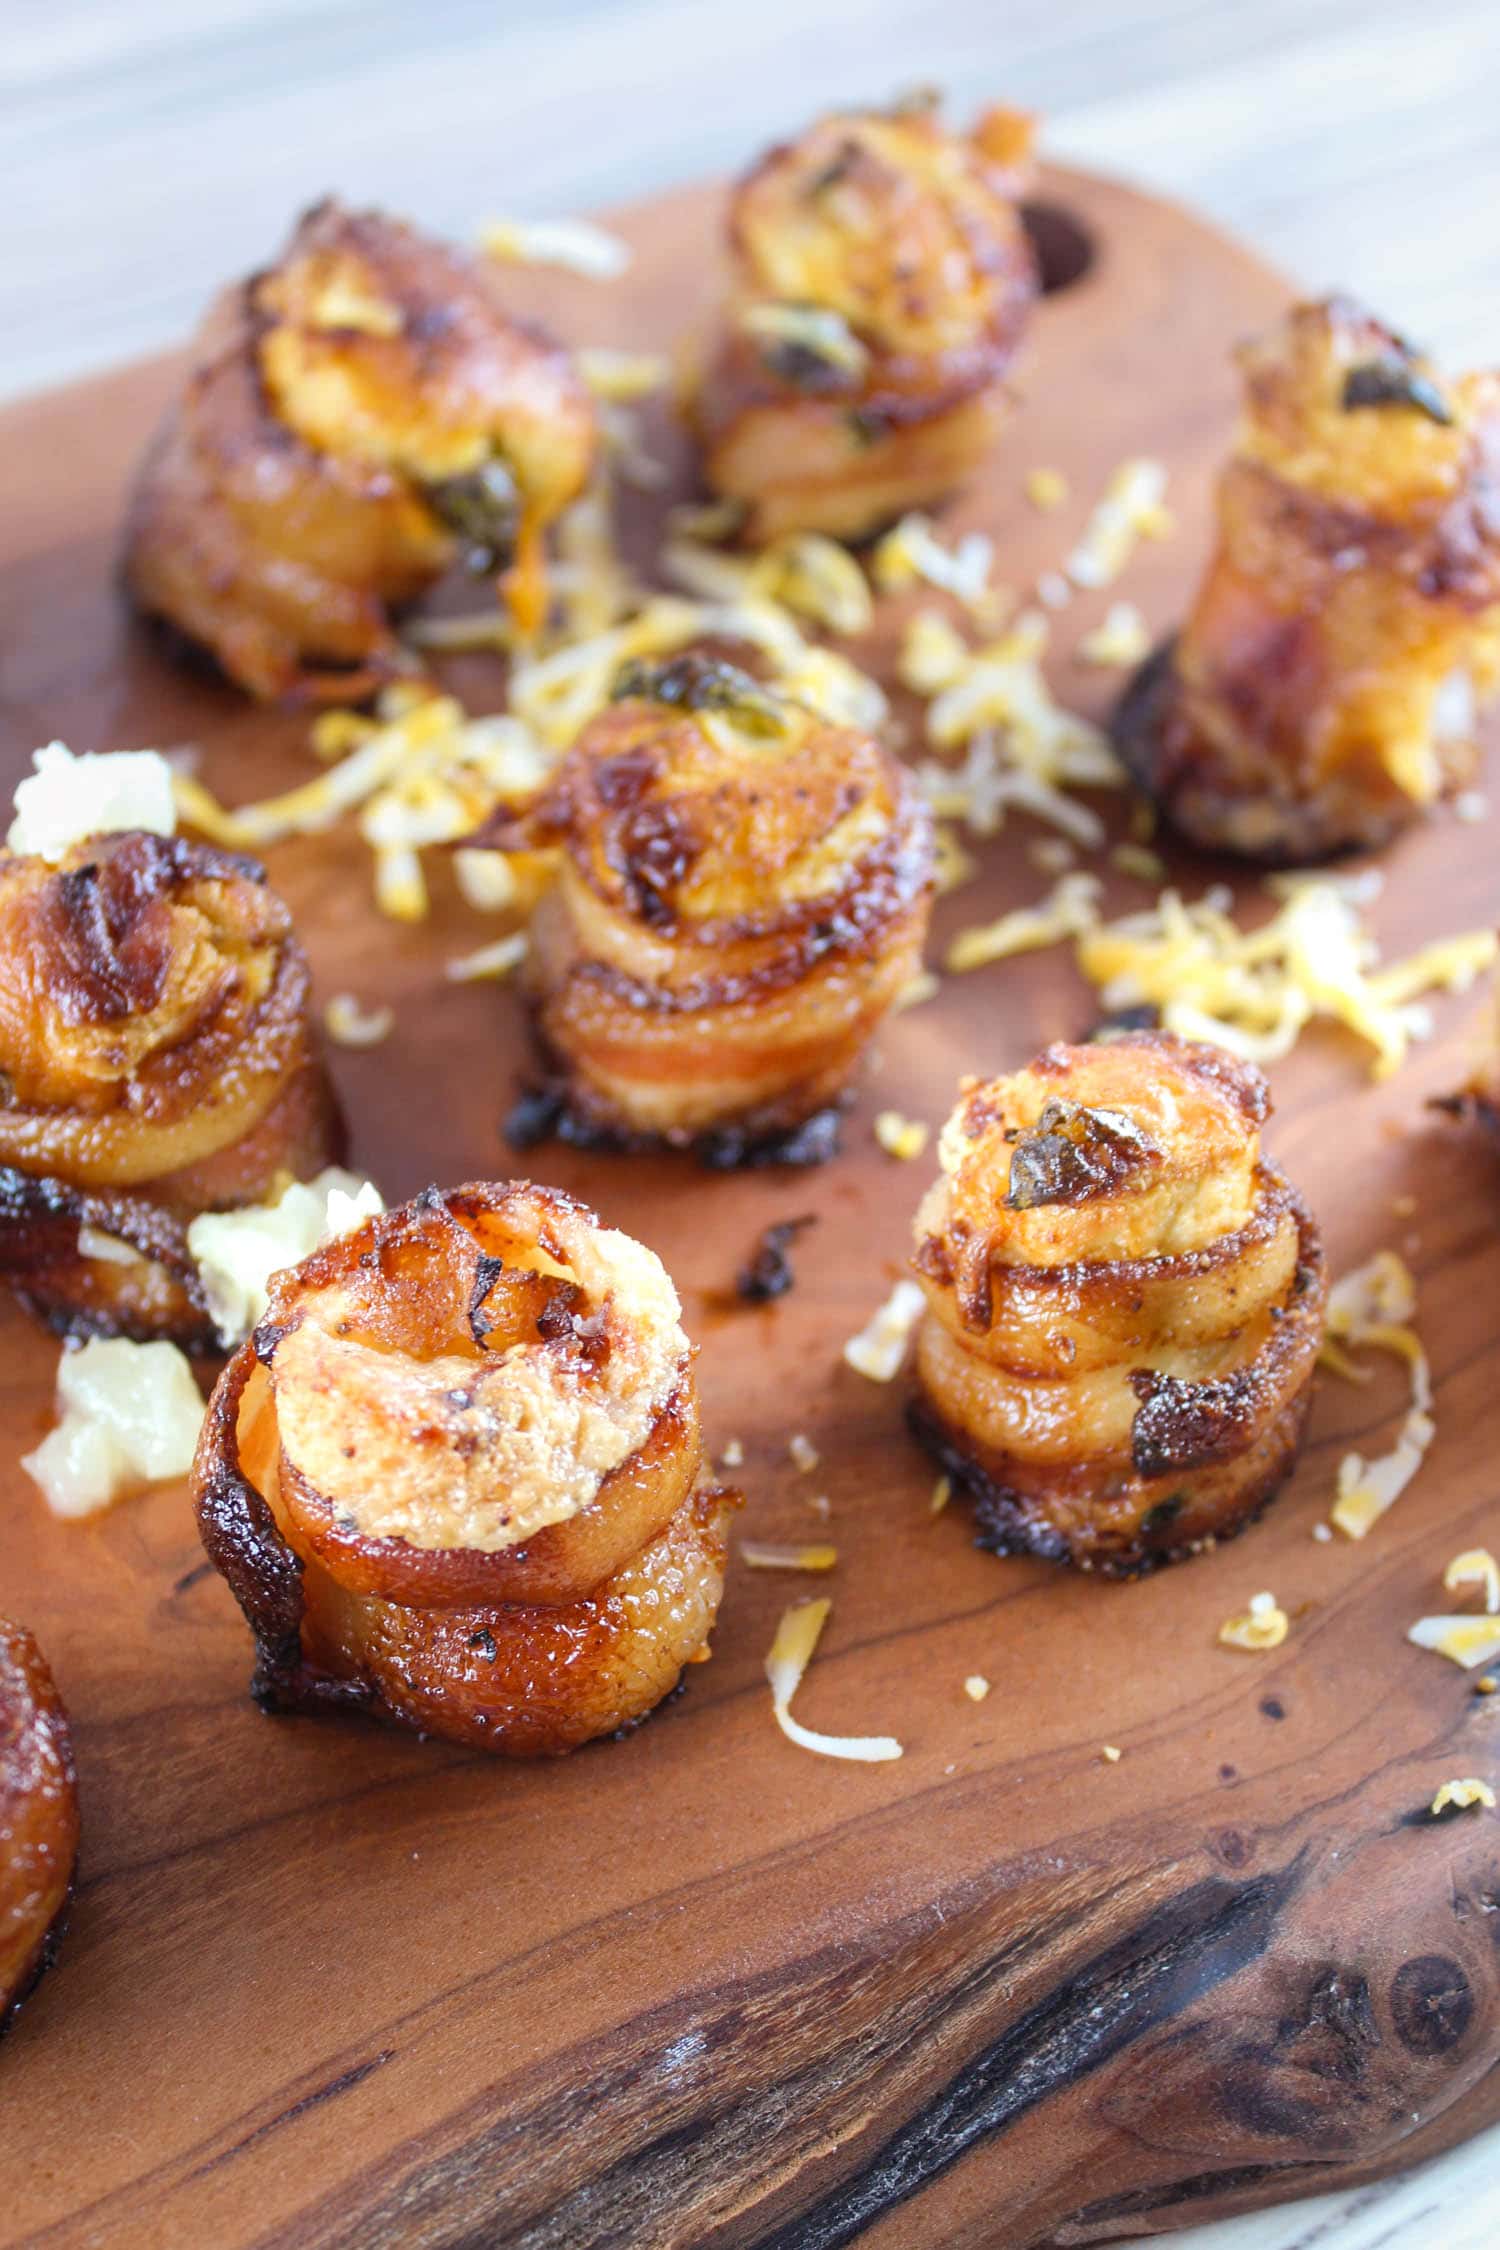 Smoked Pig Shots on the Traeger are the latest and greatest appetizer! Bacon "shot glasses" filled with smoked sausage, cream cheese and more! These are great for any summer barbecue, tailgating or holiday get-together. via @foodhussy